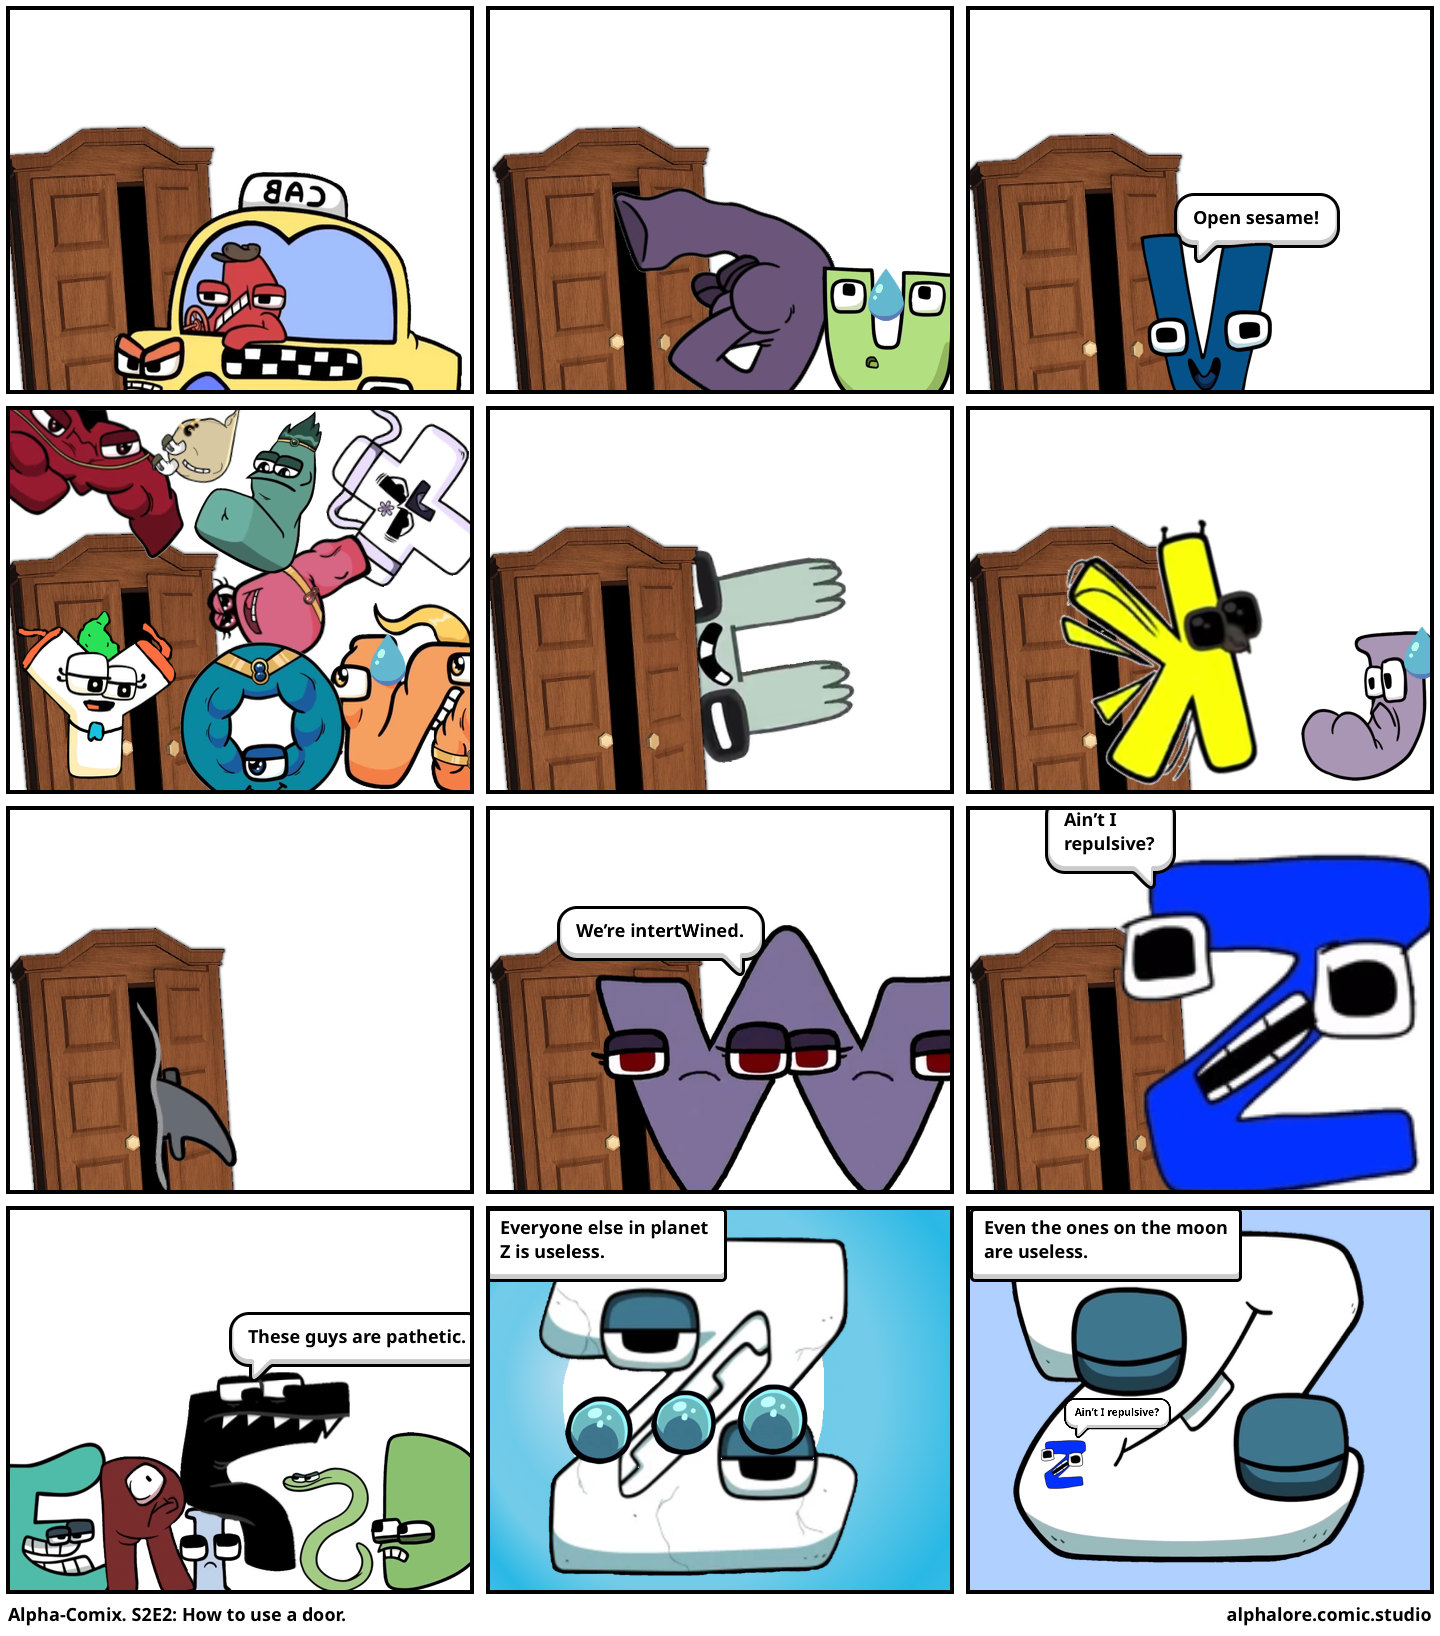 Alpha-Comix. S2E2: How to use a door.